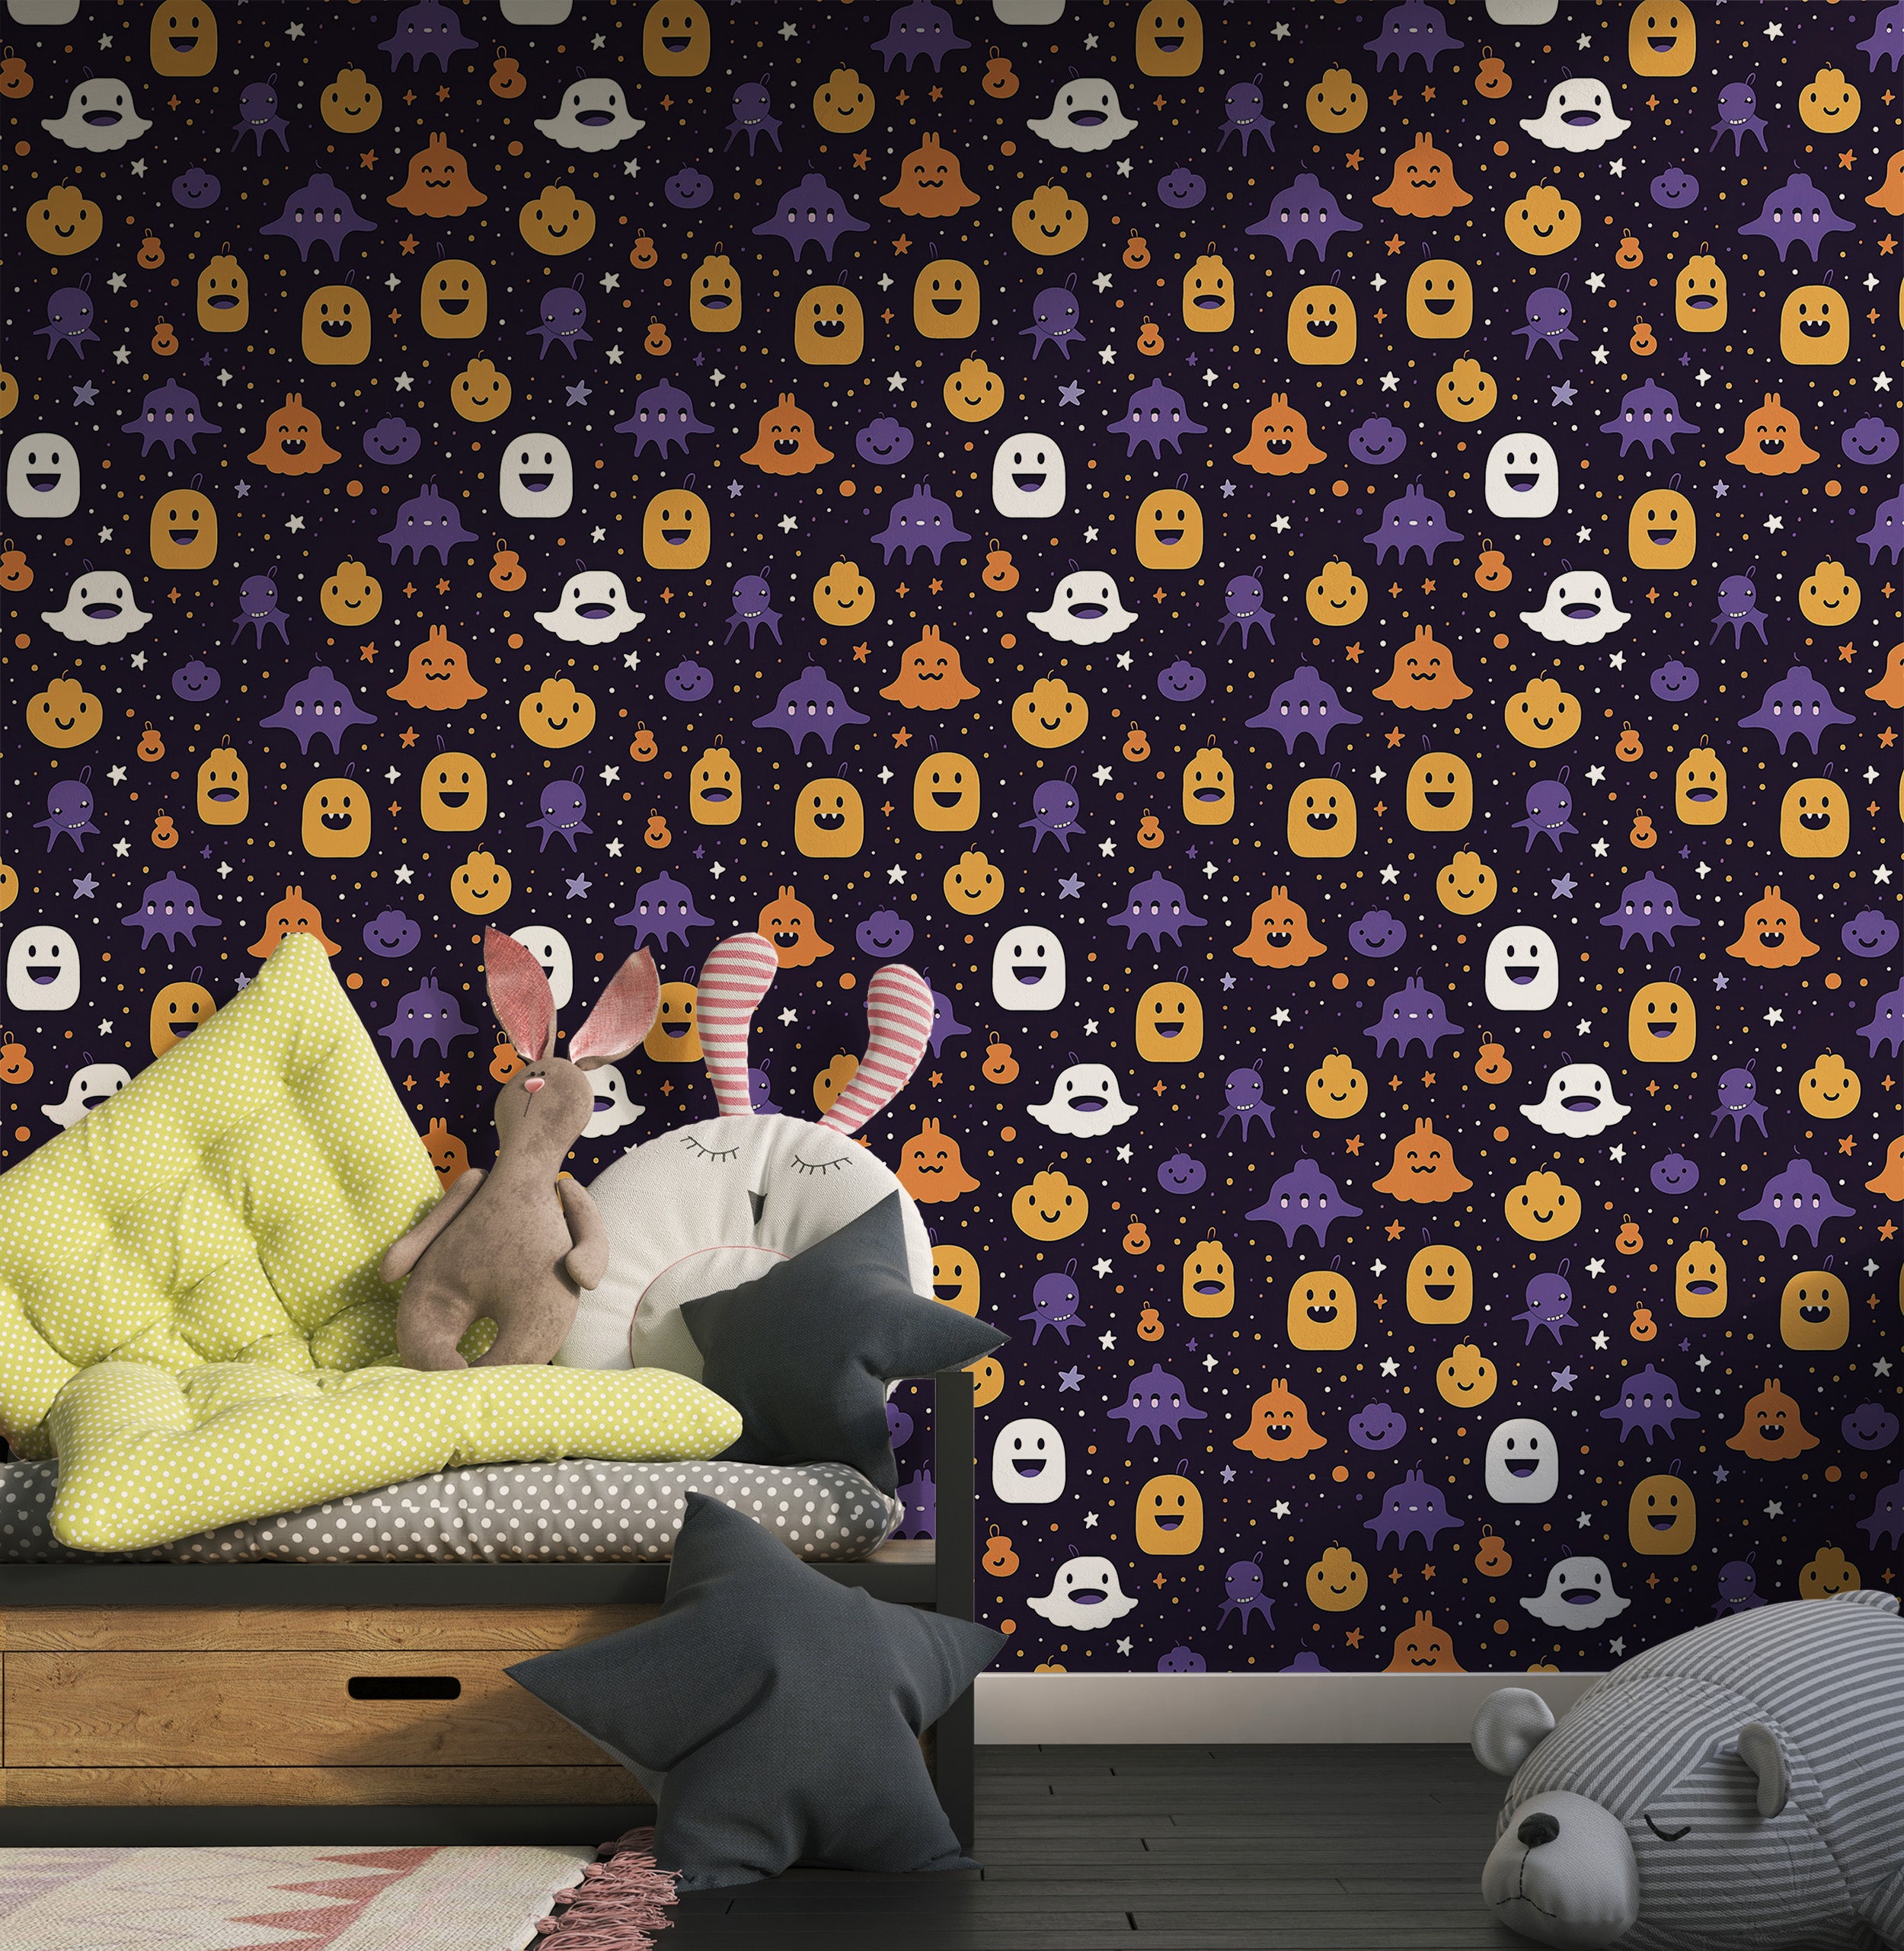 Playful Halloween Wall Decor for Kids' Rooms